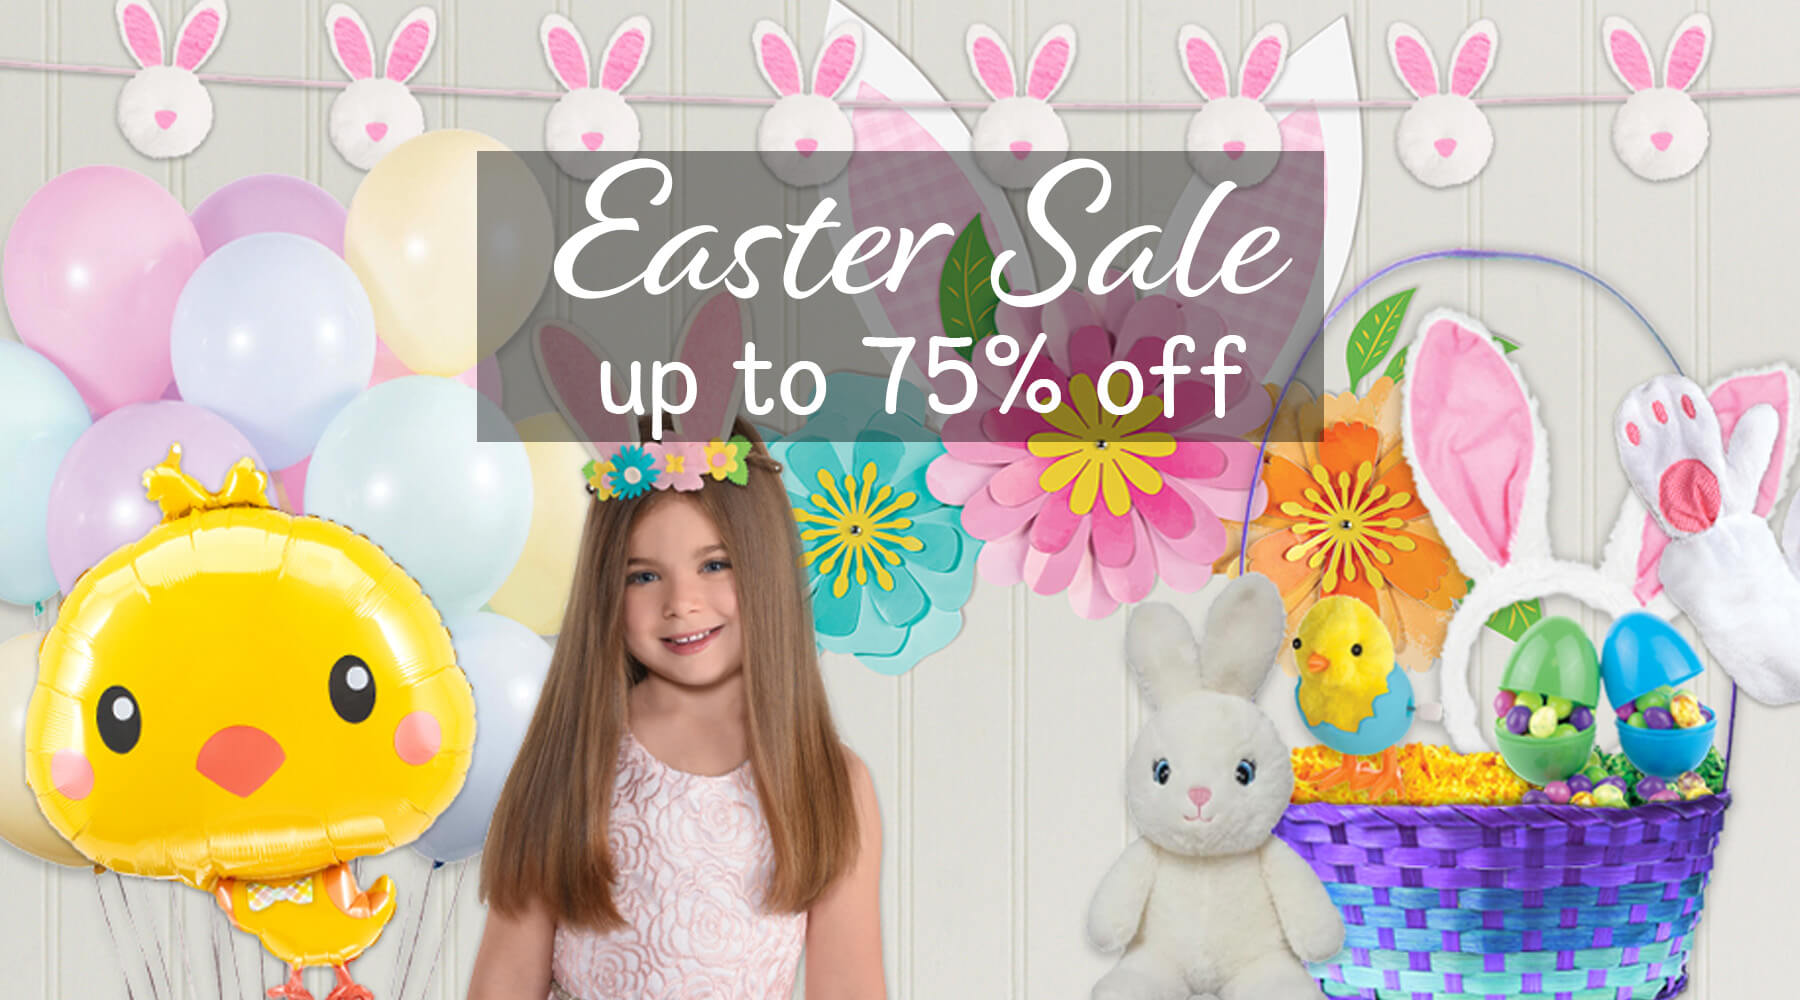 easter sale up to 75% off limited time bunnys, baskets, balloons, and more